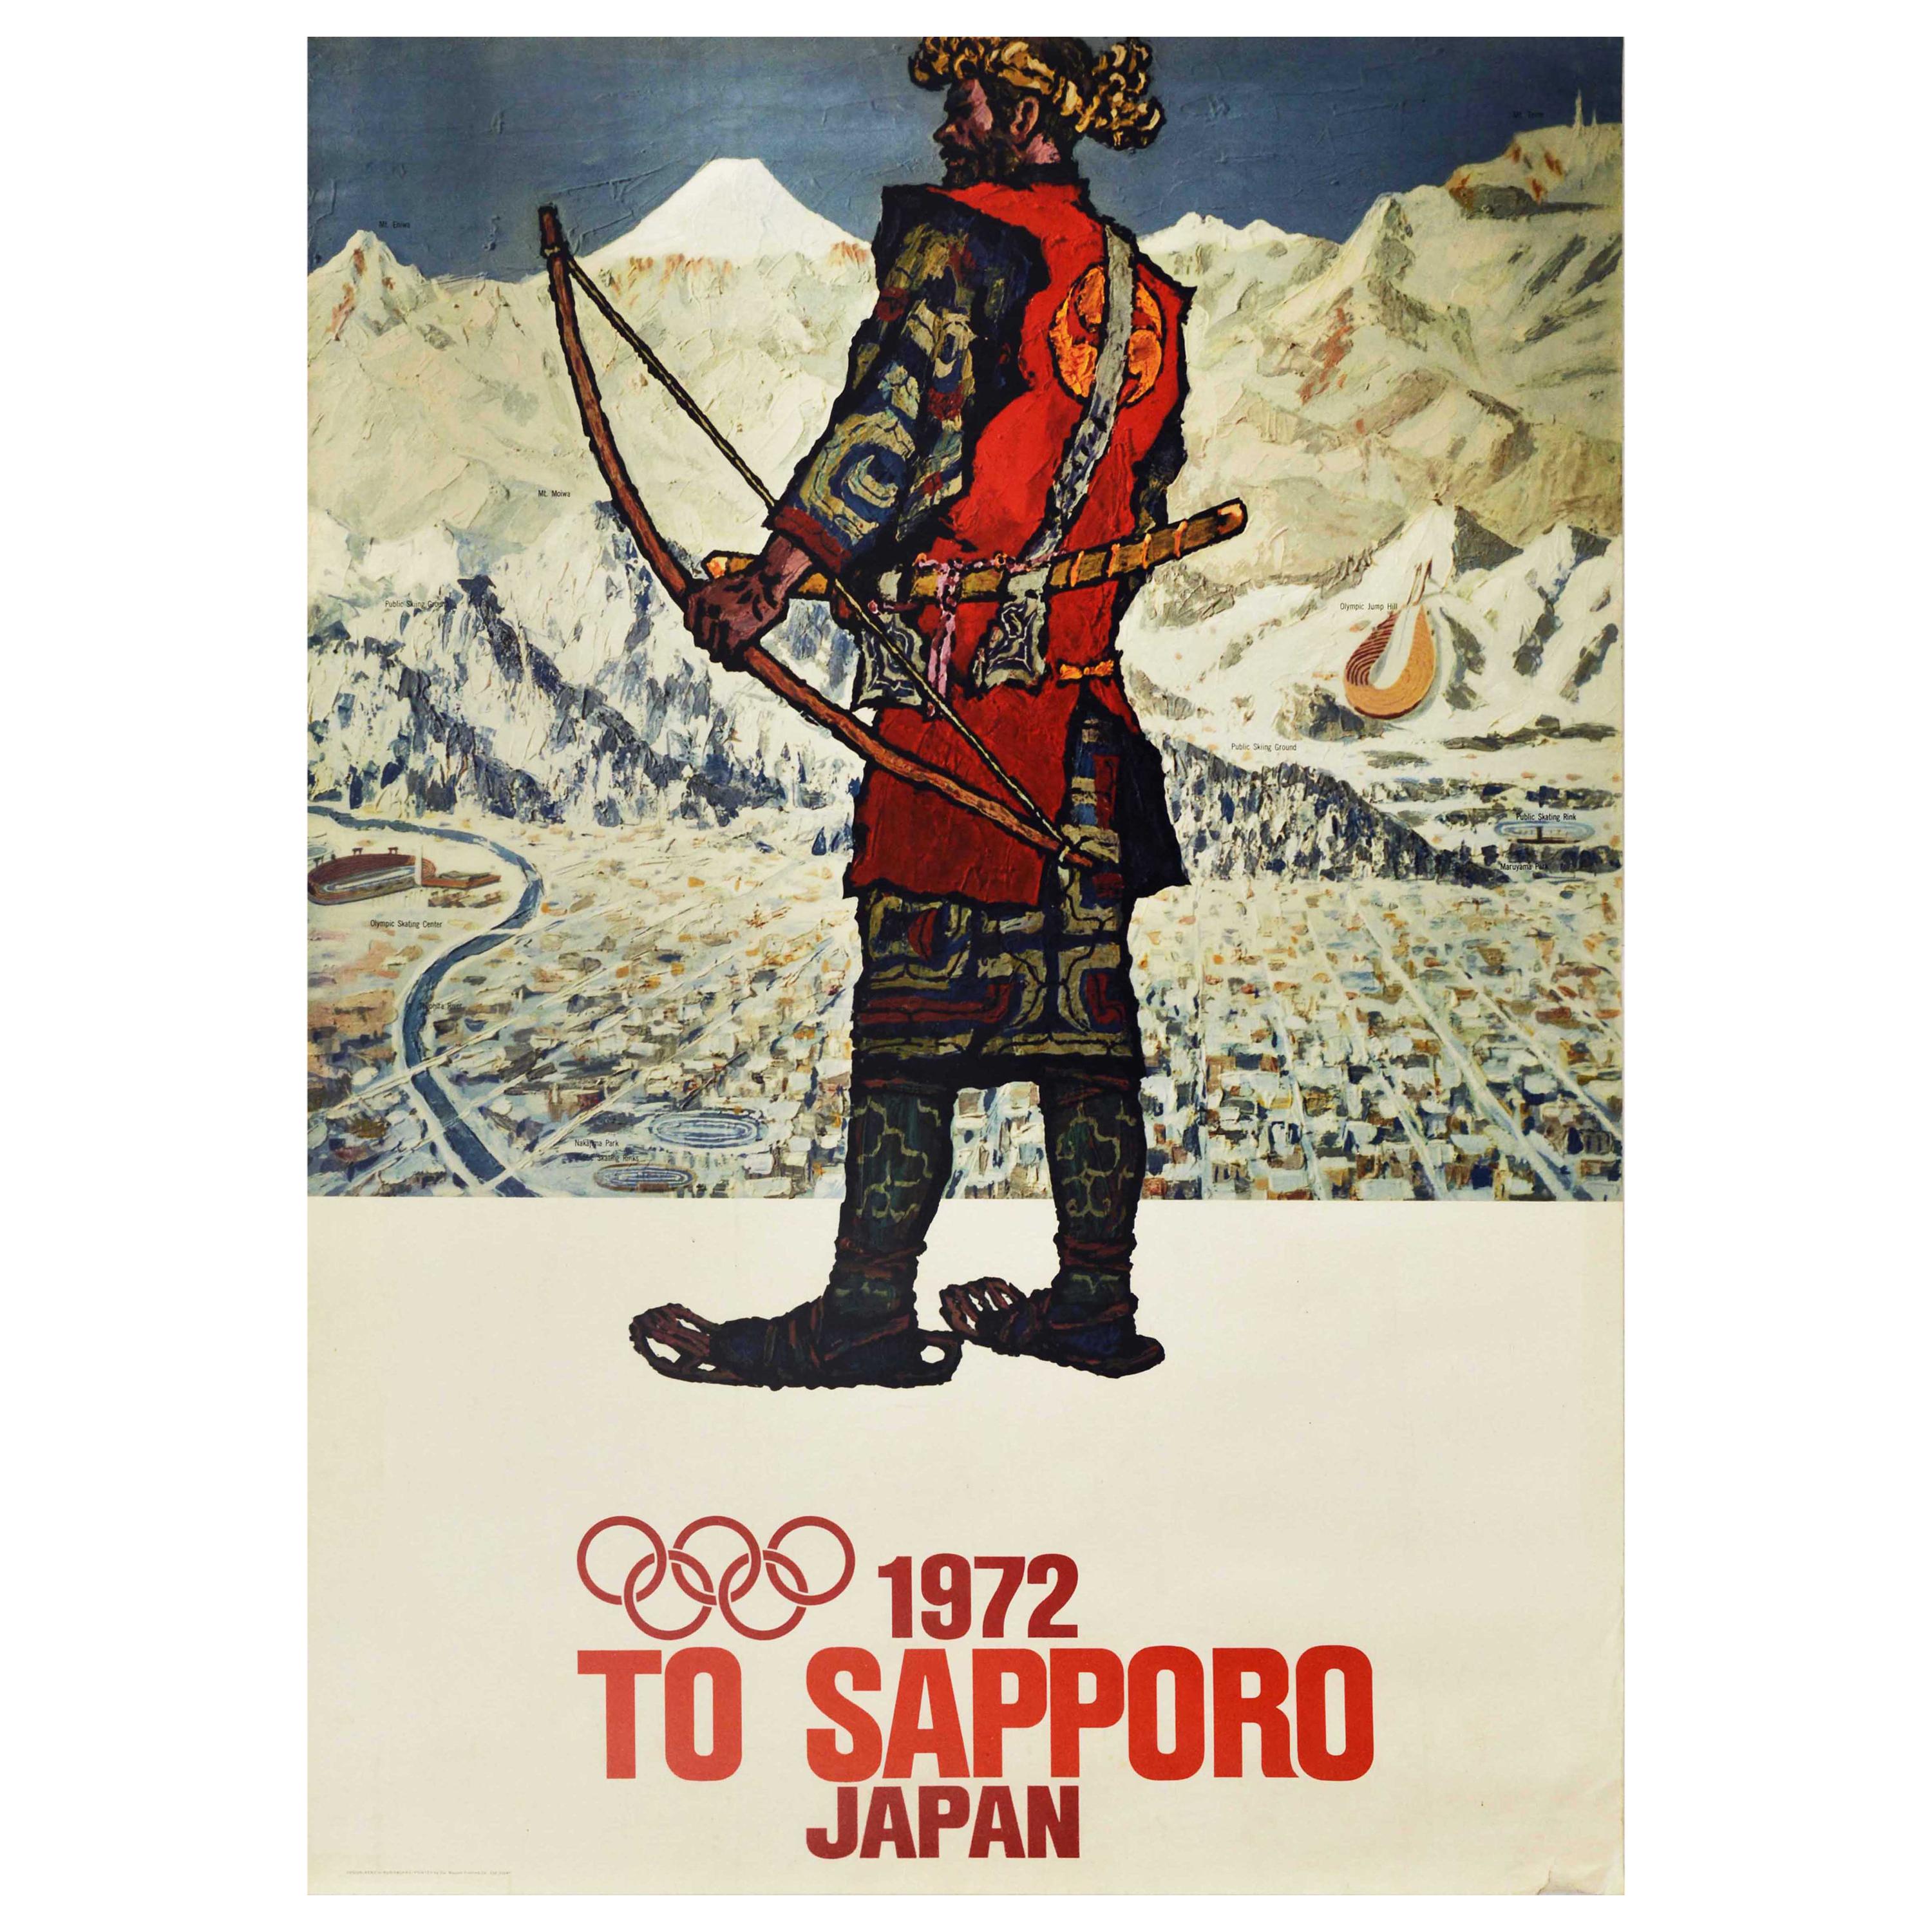 Original Vintage Poster To Sapporo Japan 1972 Winter Olympic Games Warrior Art